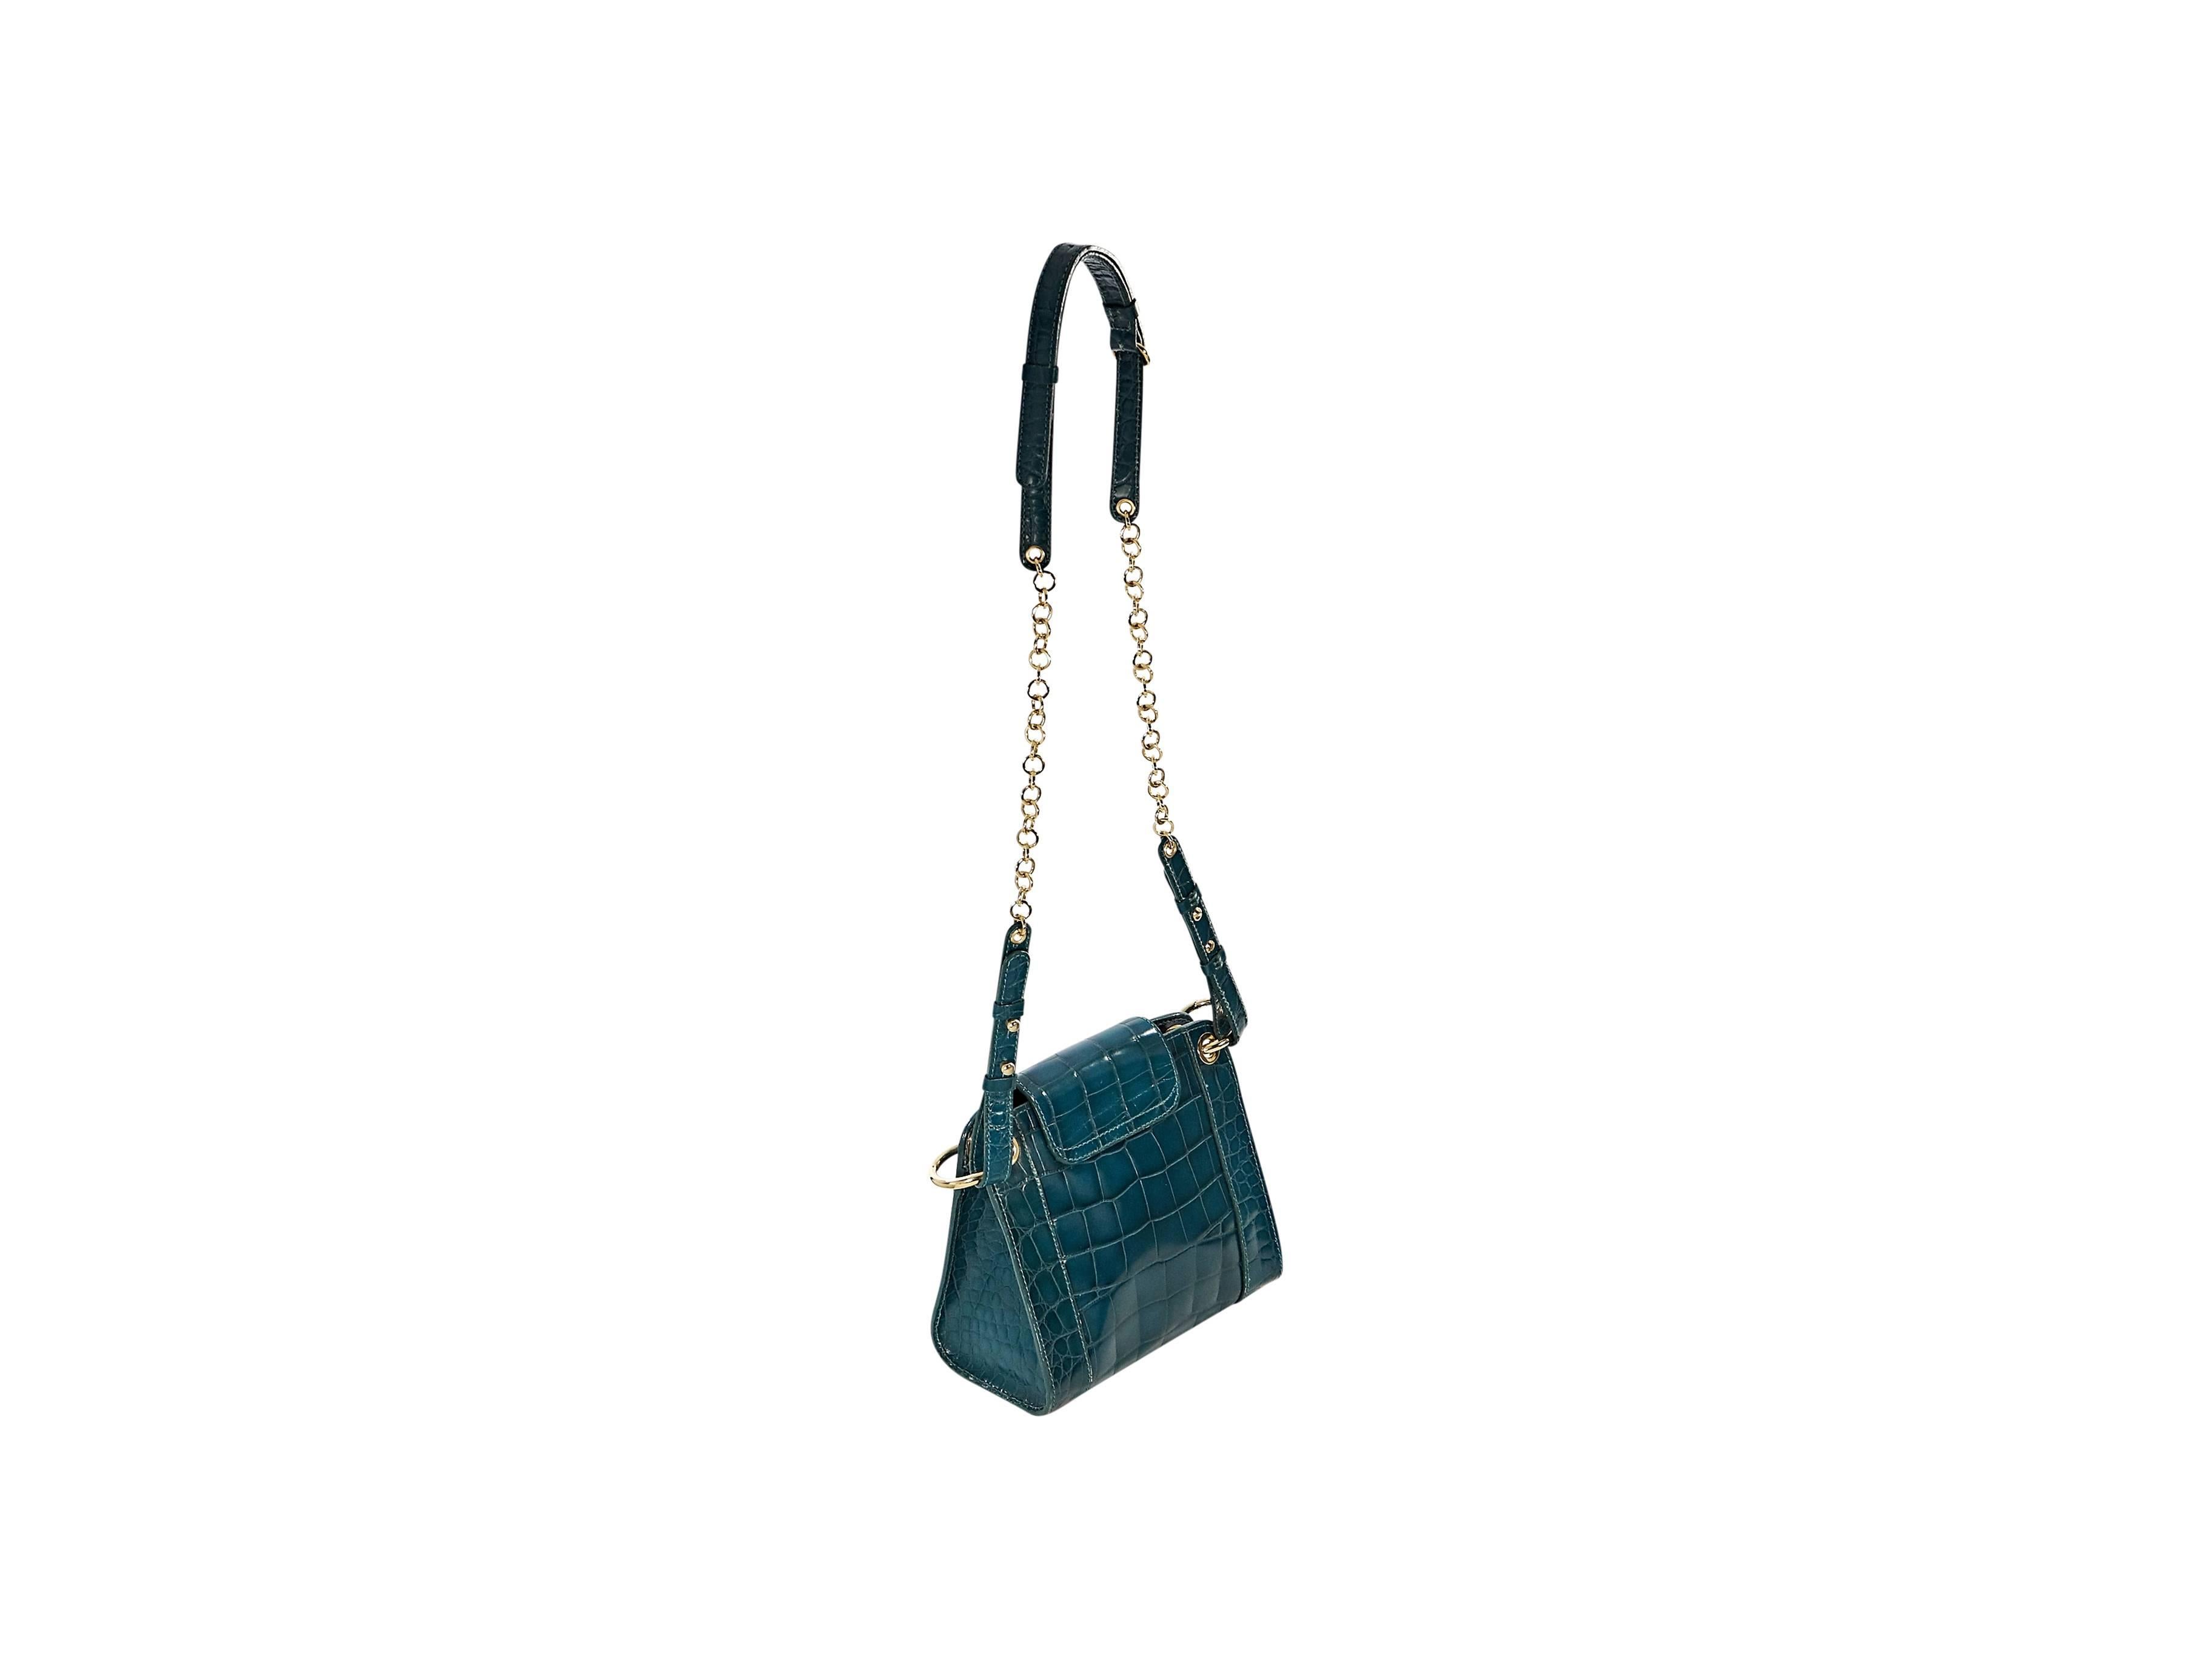 Product details:  ﻿Exotic teal alligator crossbody bag by Alberta Ferrerti.  Adjustable leather and chain crossbody strap.  Front flap with knocker accent. Concealed magnetic snap closure.  Lined interior.  Goldtone hardware.  7.25